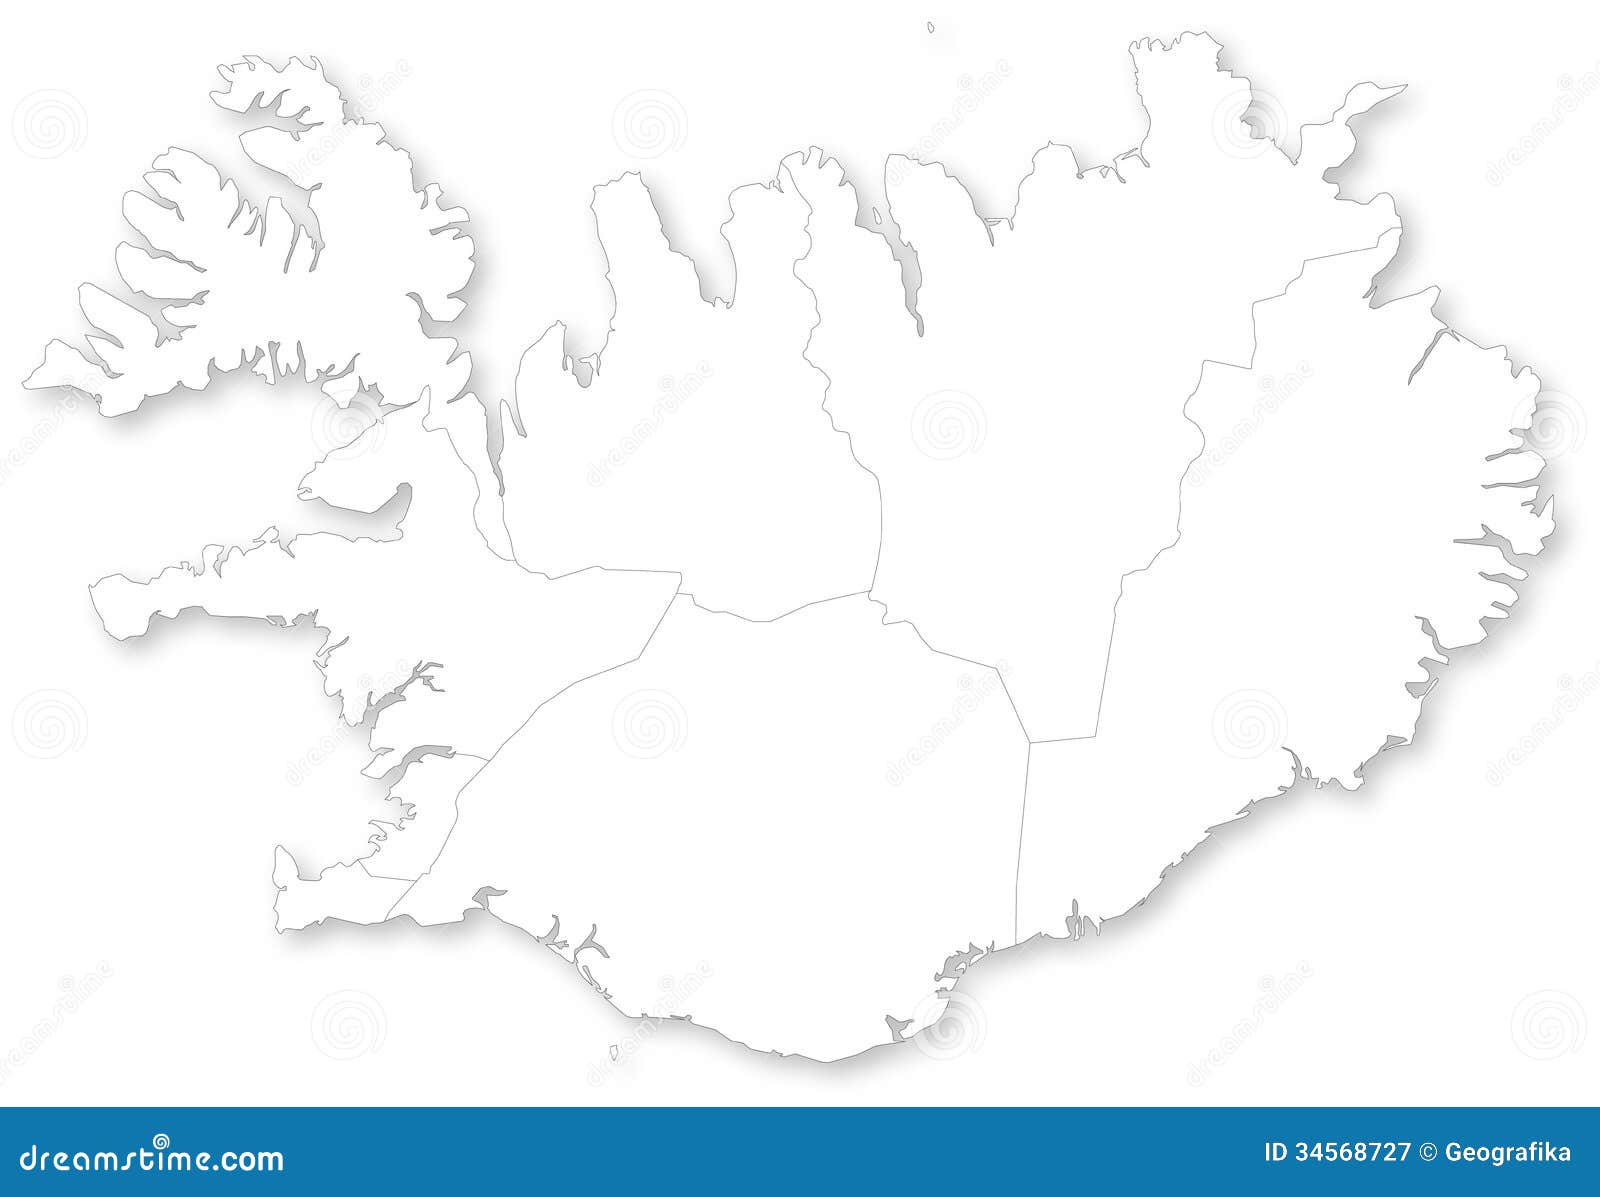 map of iceland with regions.